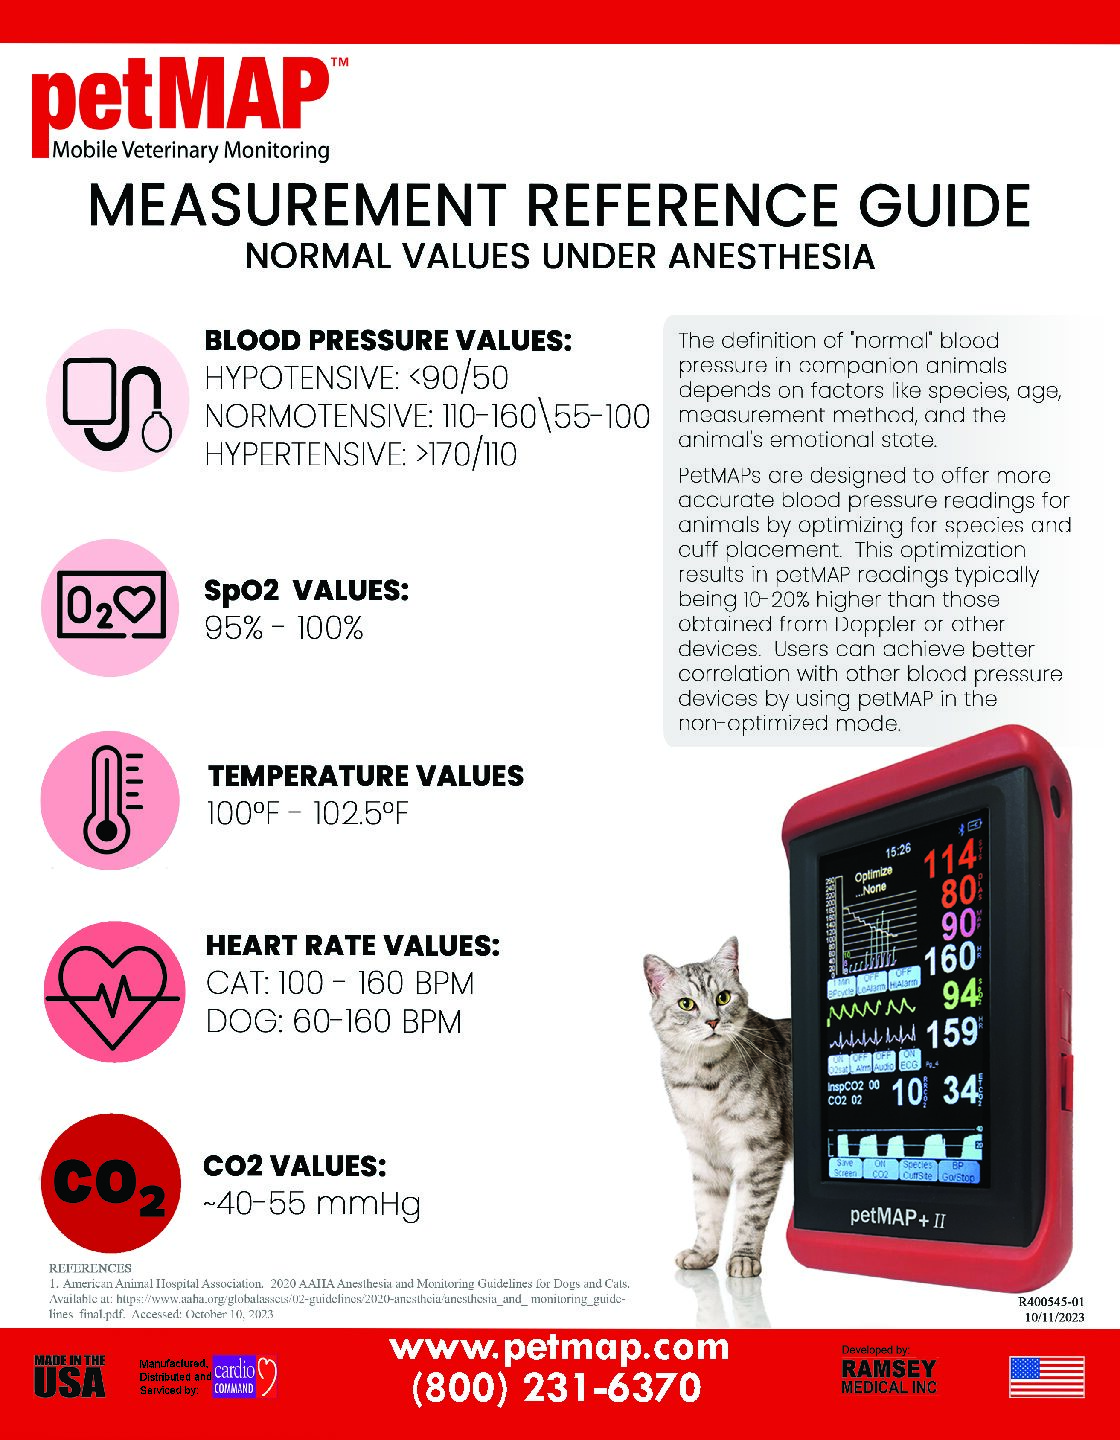 R400545-01, petMAP Measurement Reference Guide